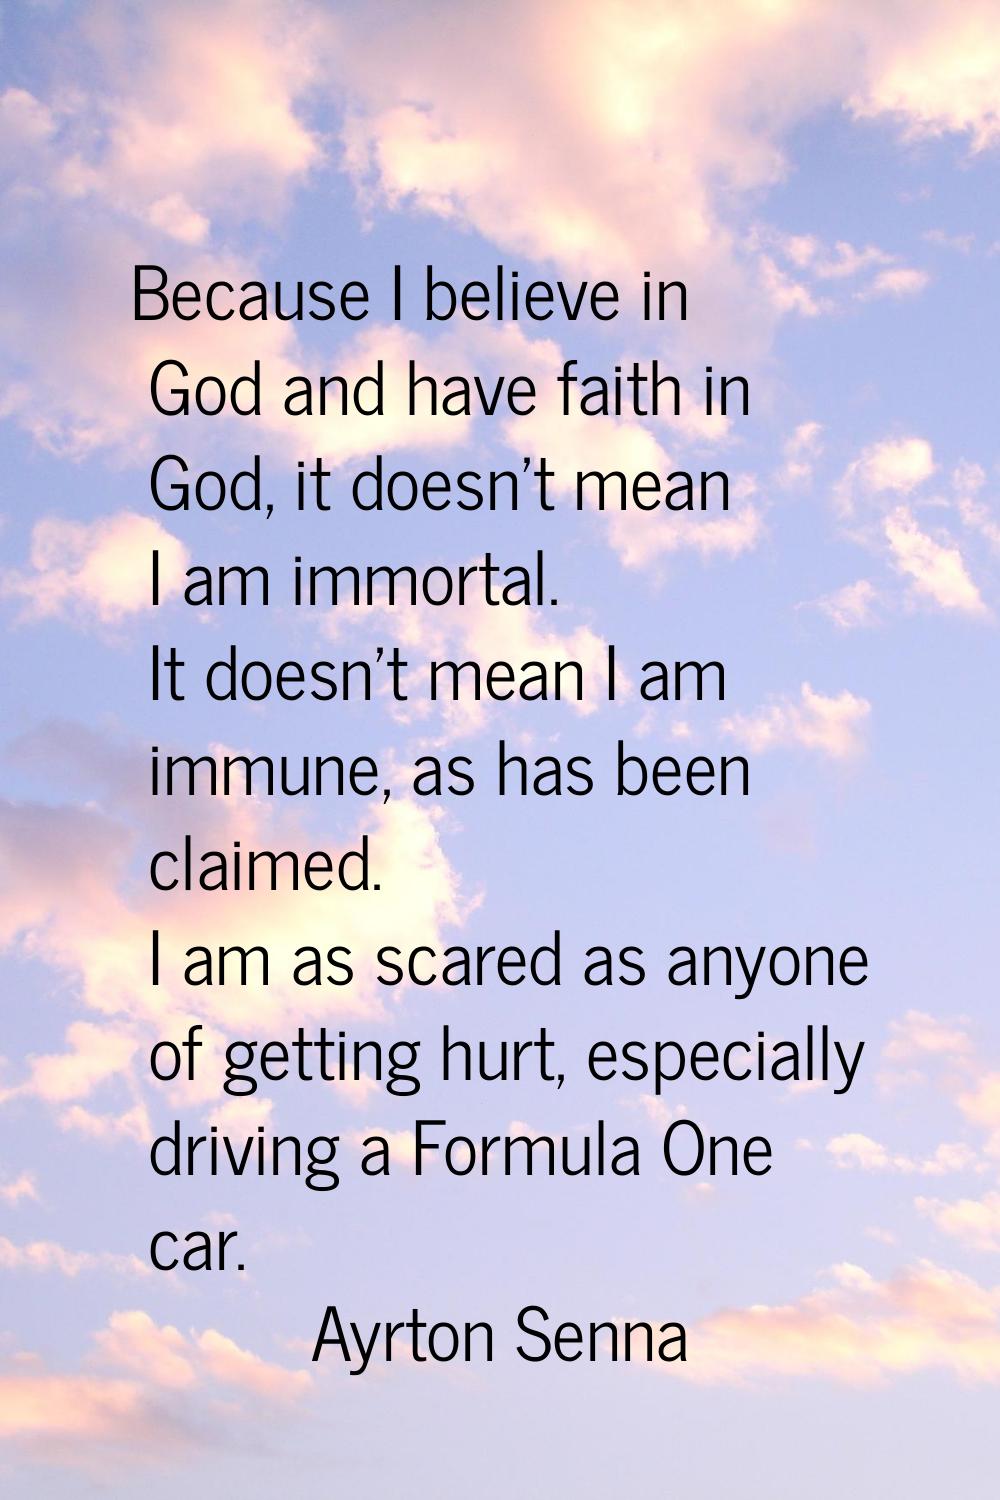 Because I believe in God and have faith in God, it doesn't mean I am immortal. It doesn't mean I am